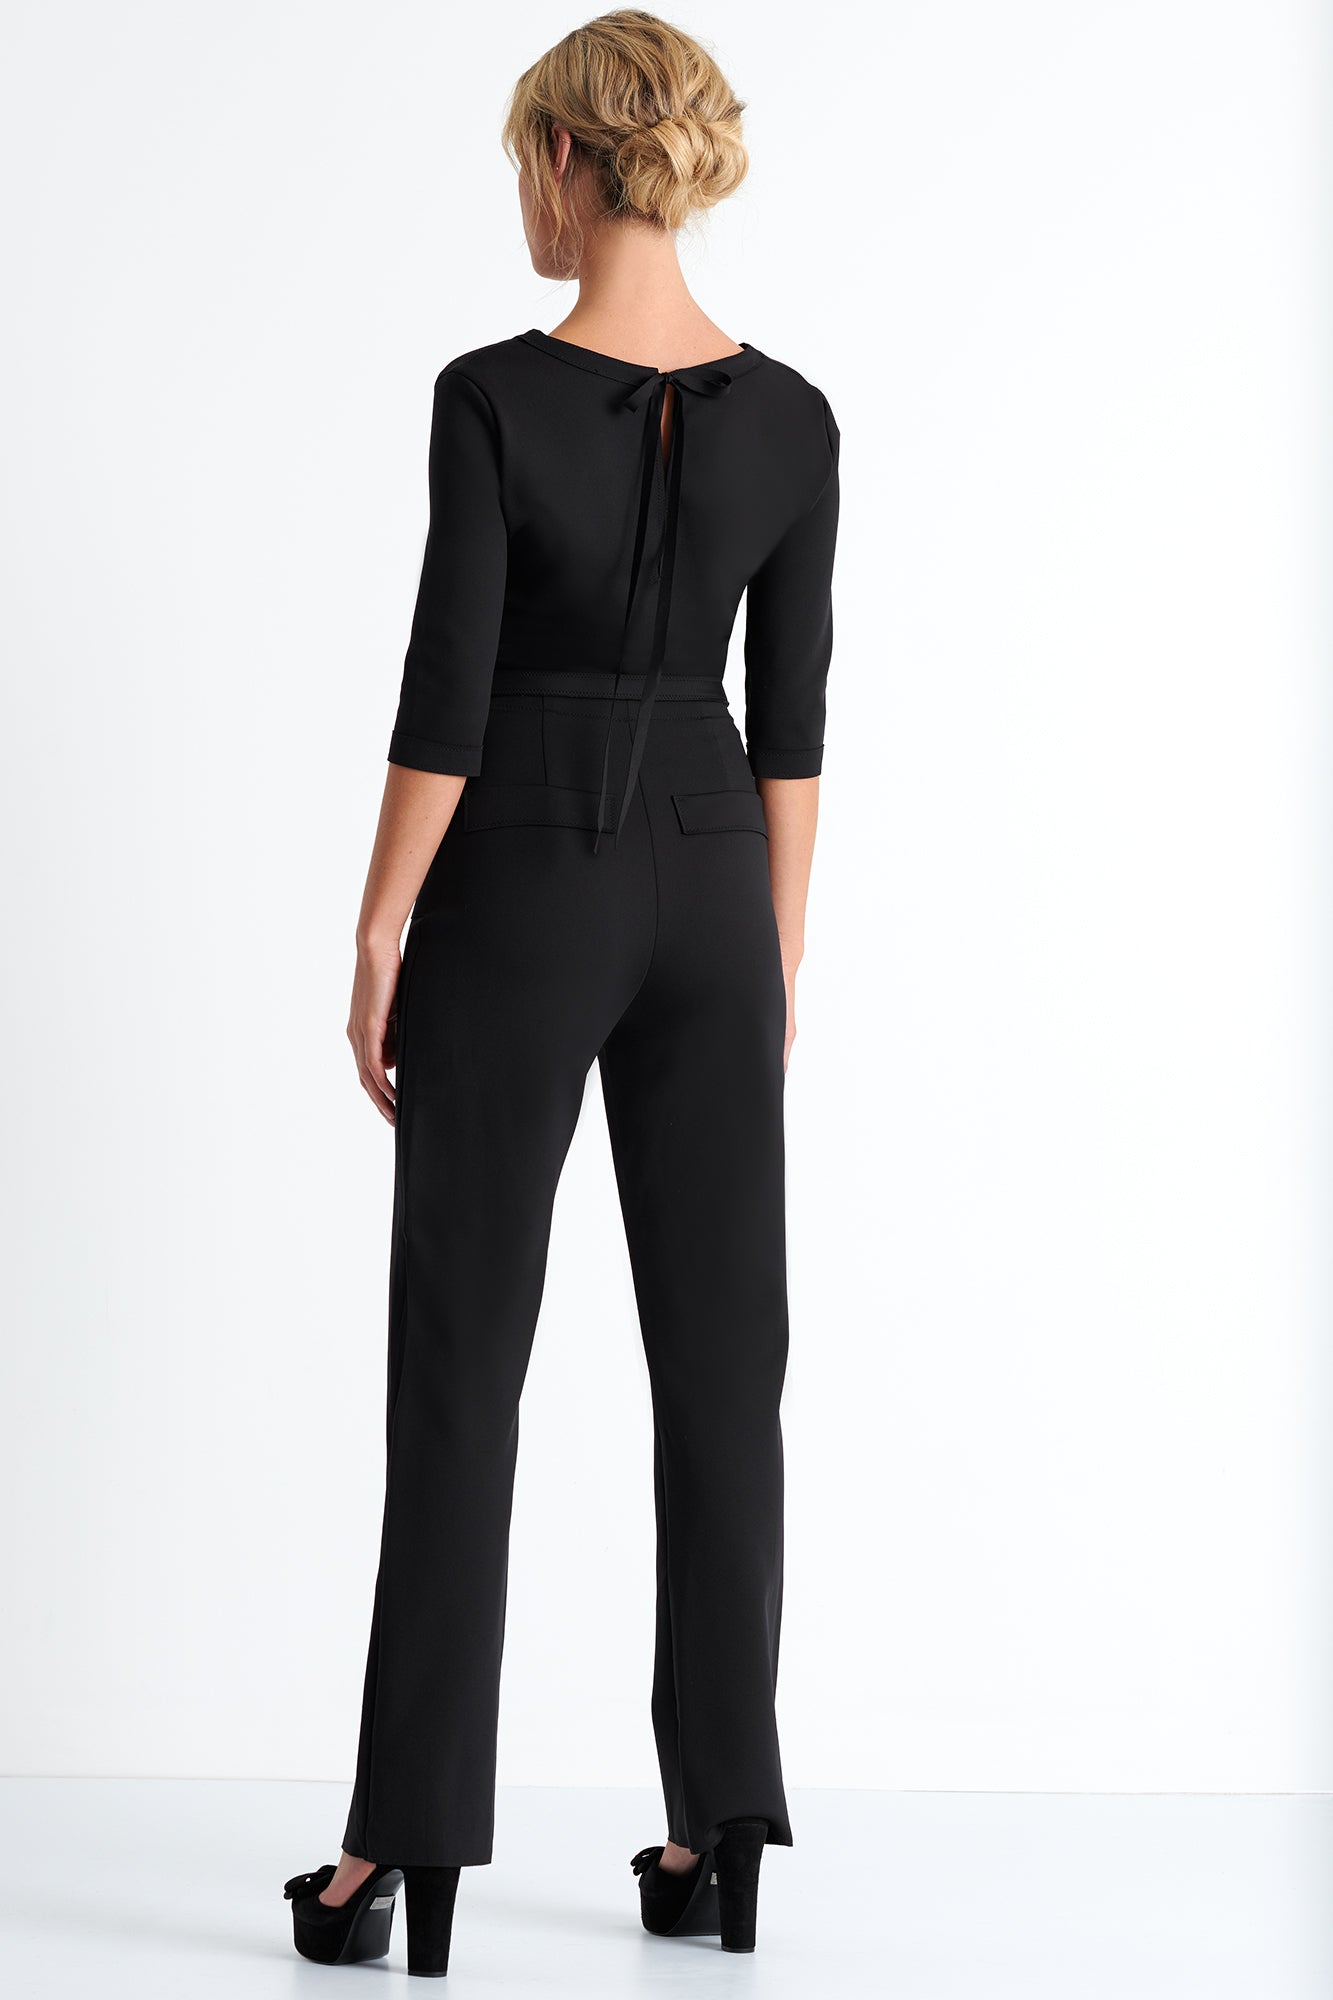 MESH AND JERSEY 3D JUMPSUIT